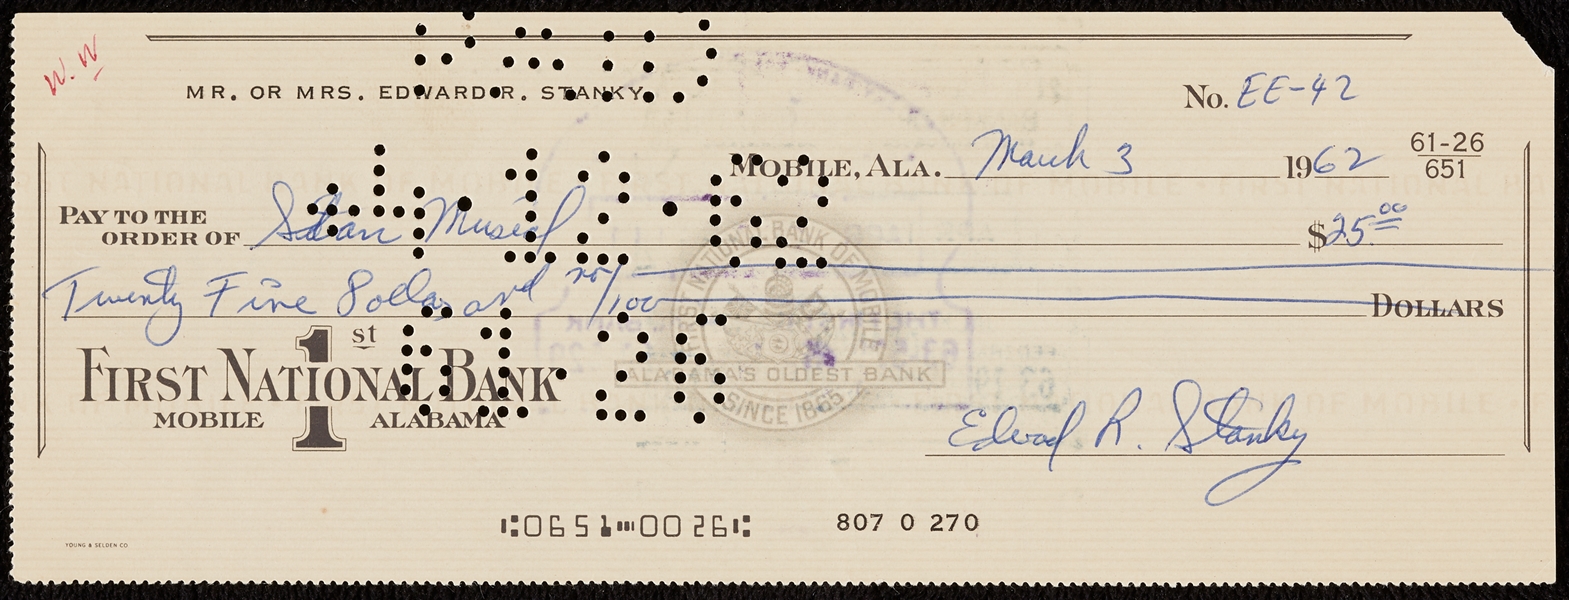 Ed Stanky Signed & Stan Musial Endorsed Bank Check (1962)